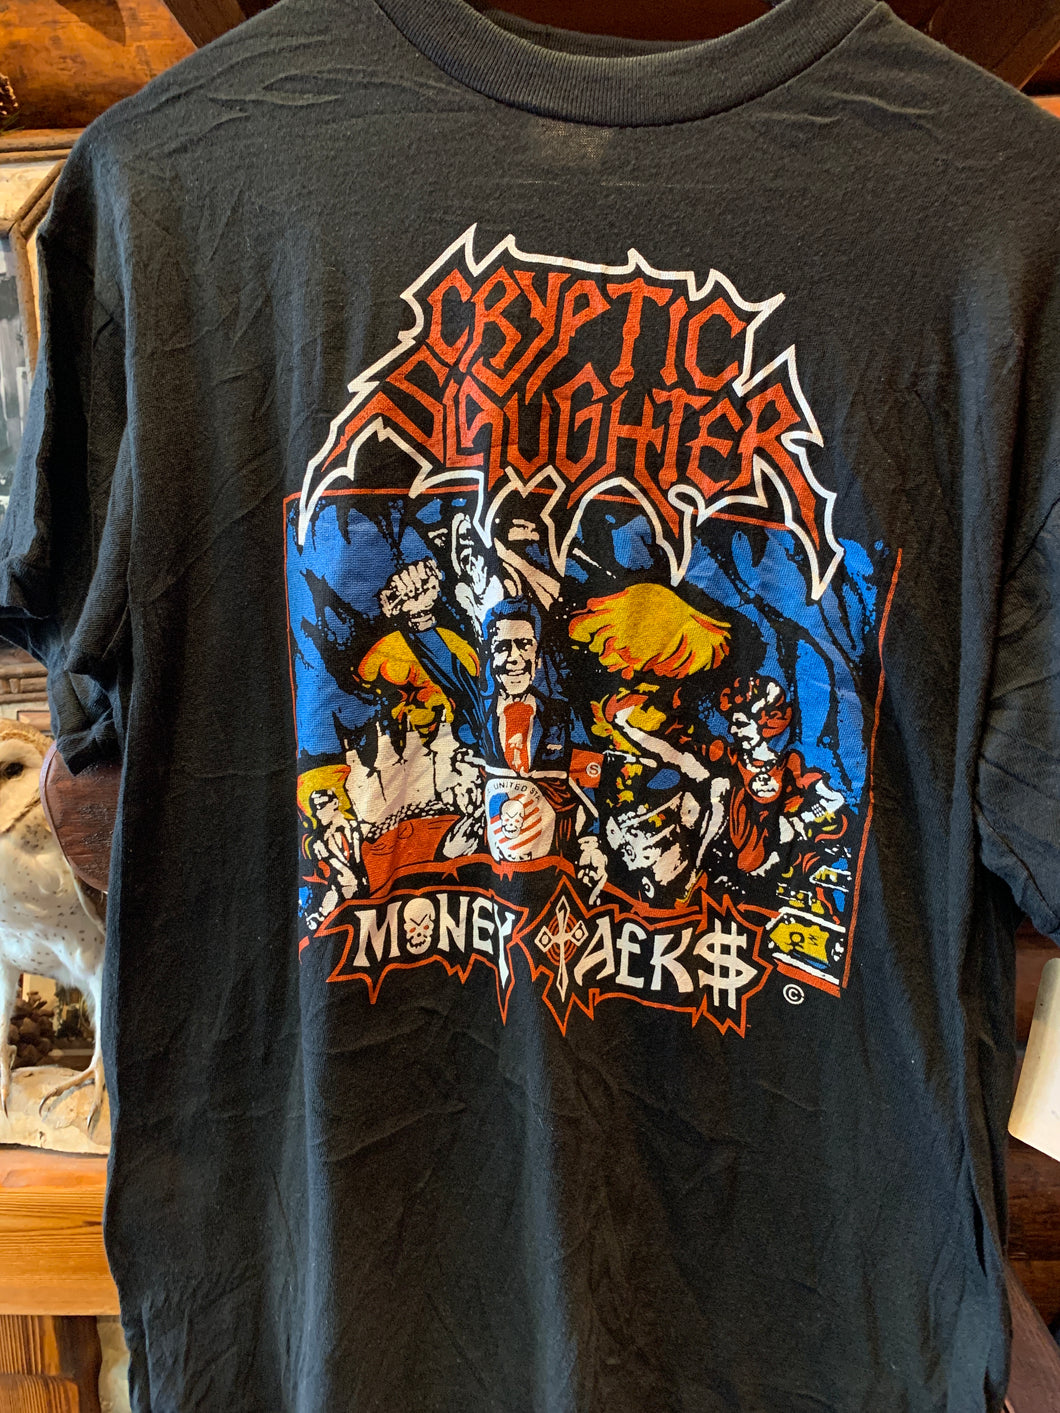 19. Cryptic Slaughter Repro Bootleg Car Lot Rock Tee, Small